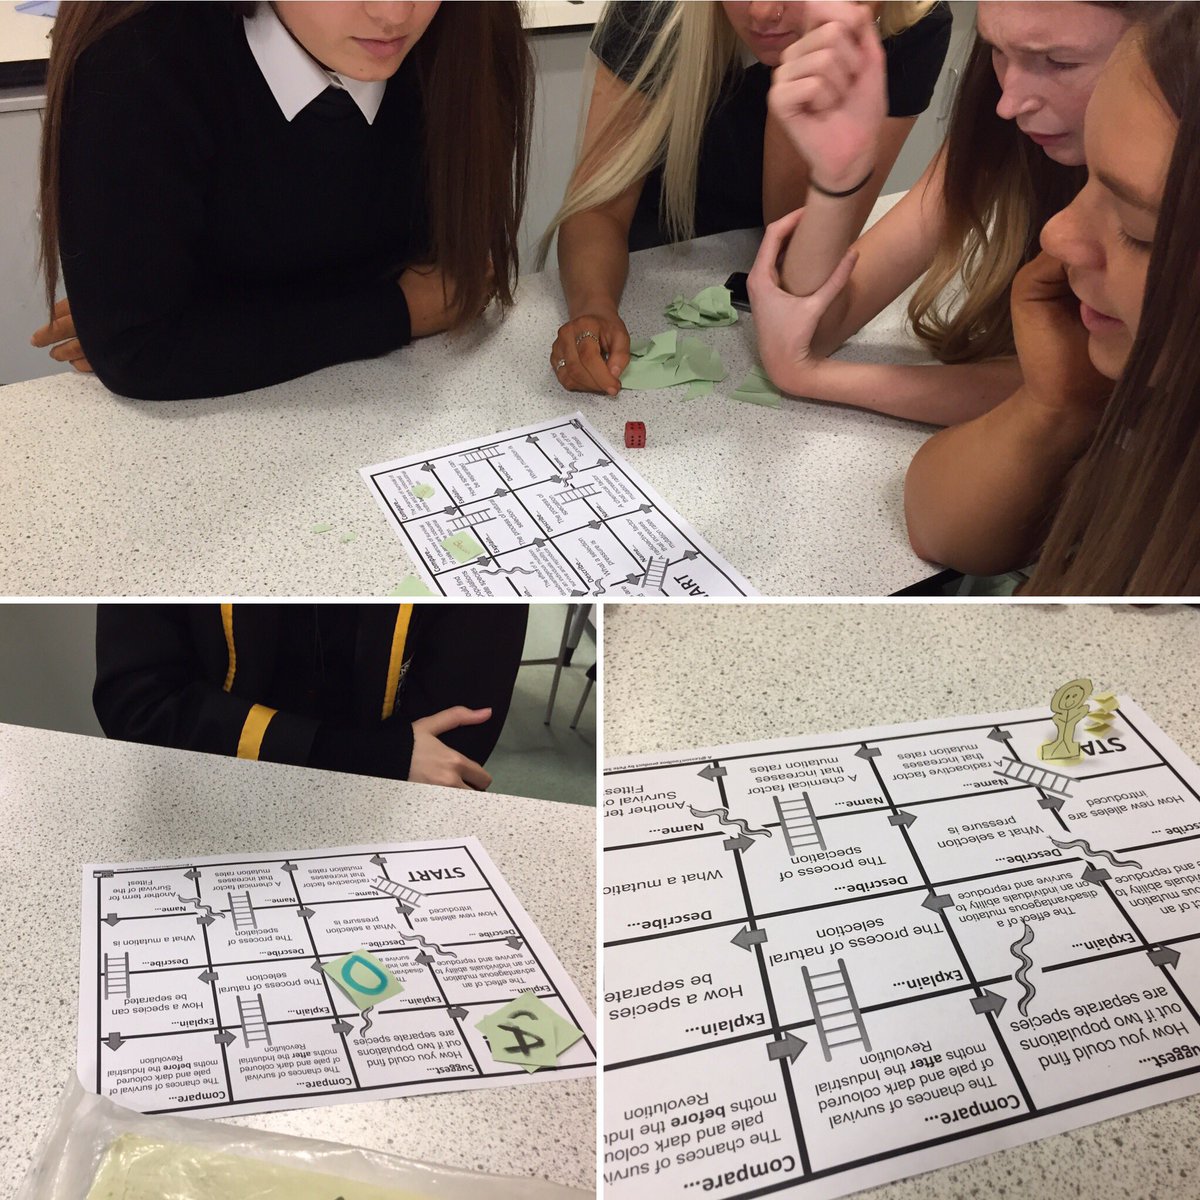 Some #BloomsTaxonomy snakes and ladders games for National 5 revision today. Thanks @LornshillSocSub for the brilliant ideas!